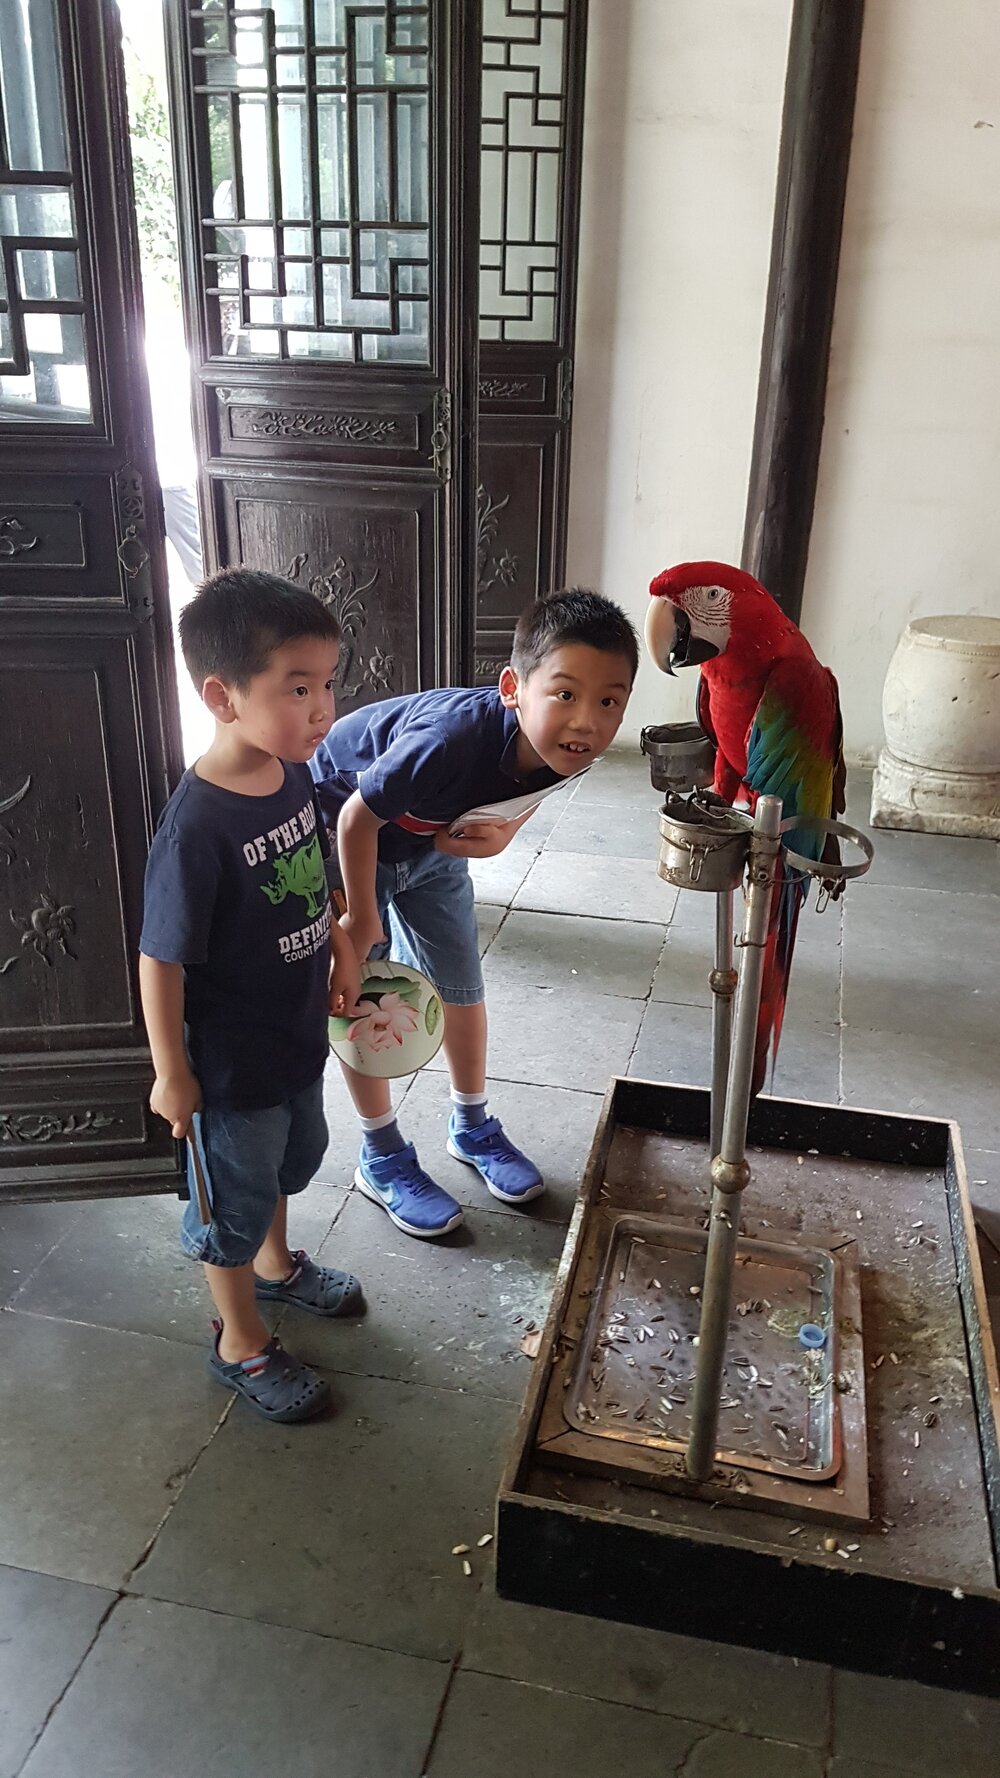 Chinese Parrot